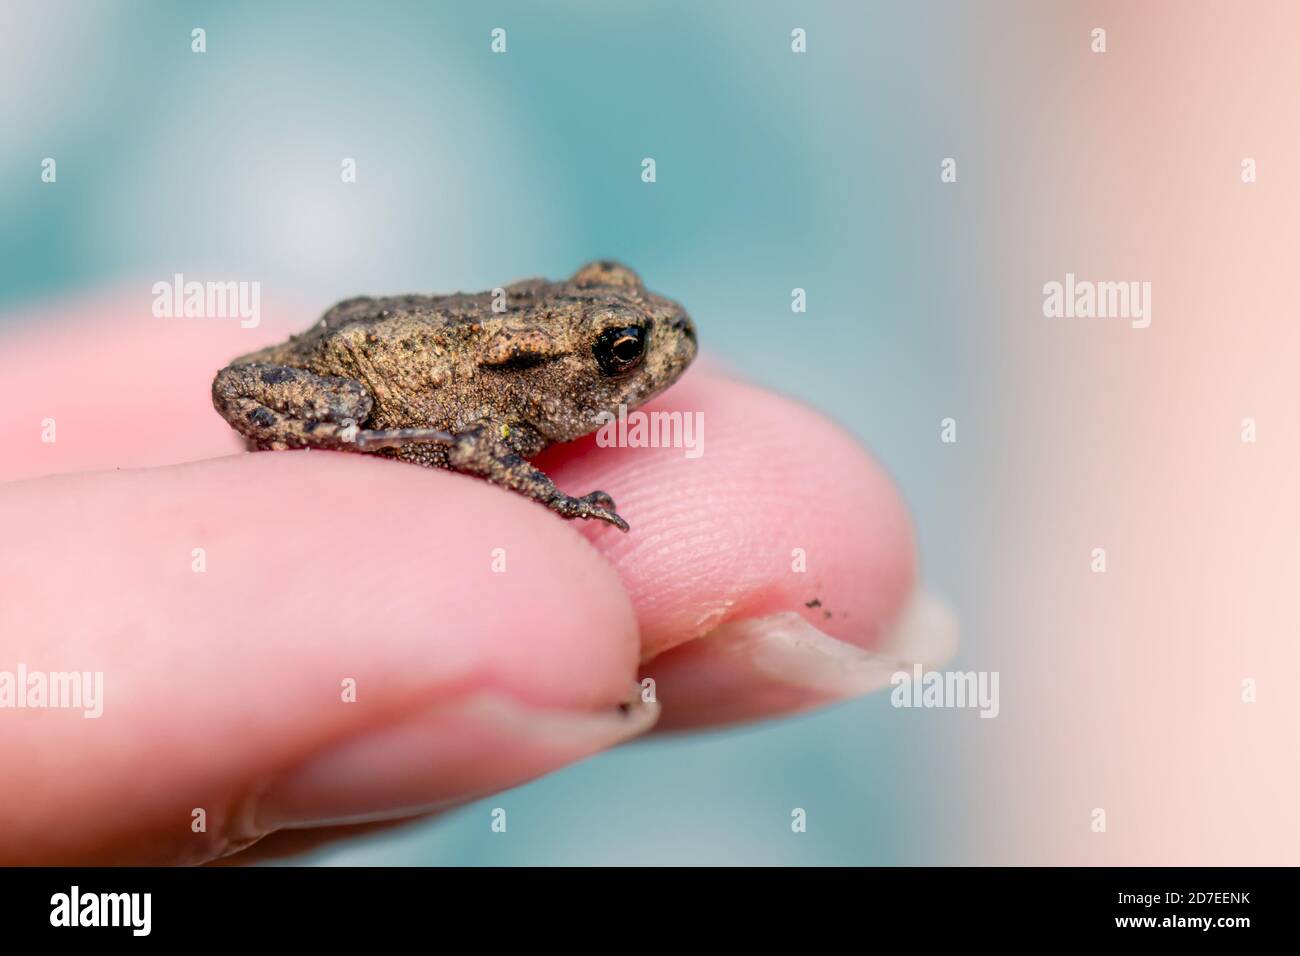 A person holding a small juvenile common toad in their hands Stock Photo